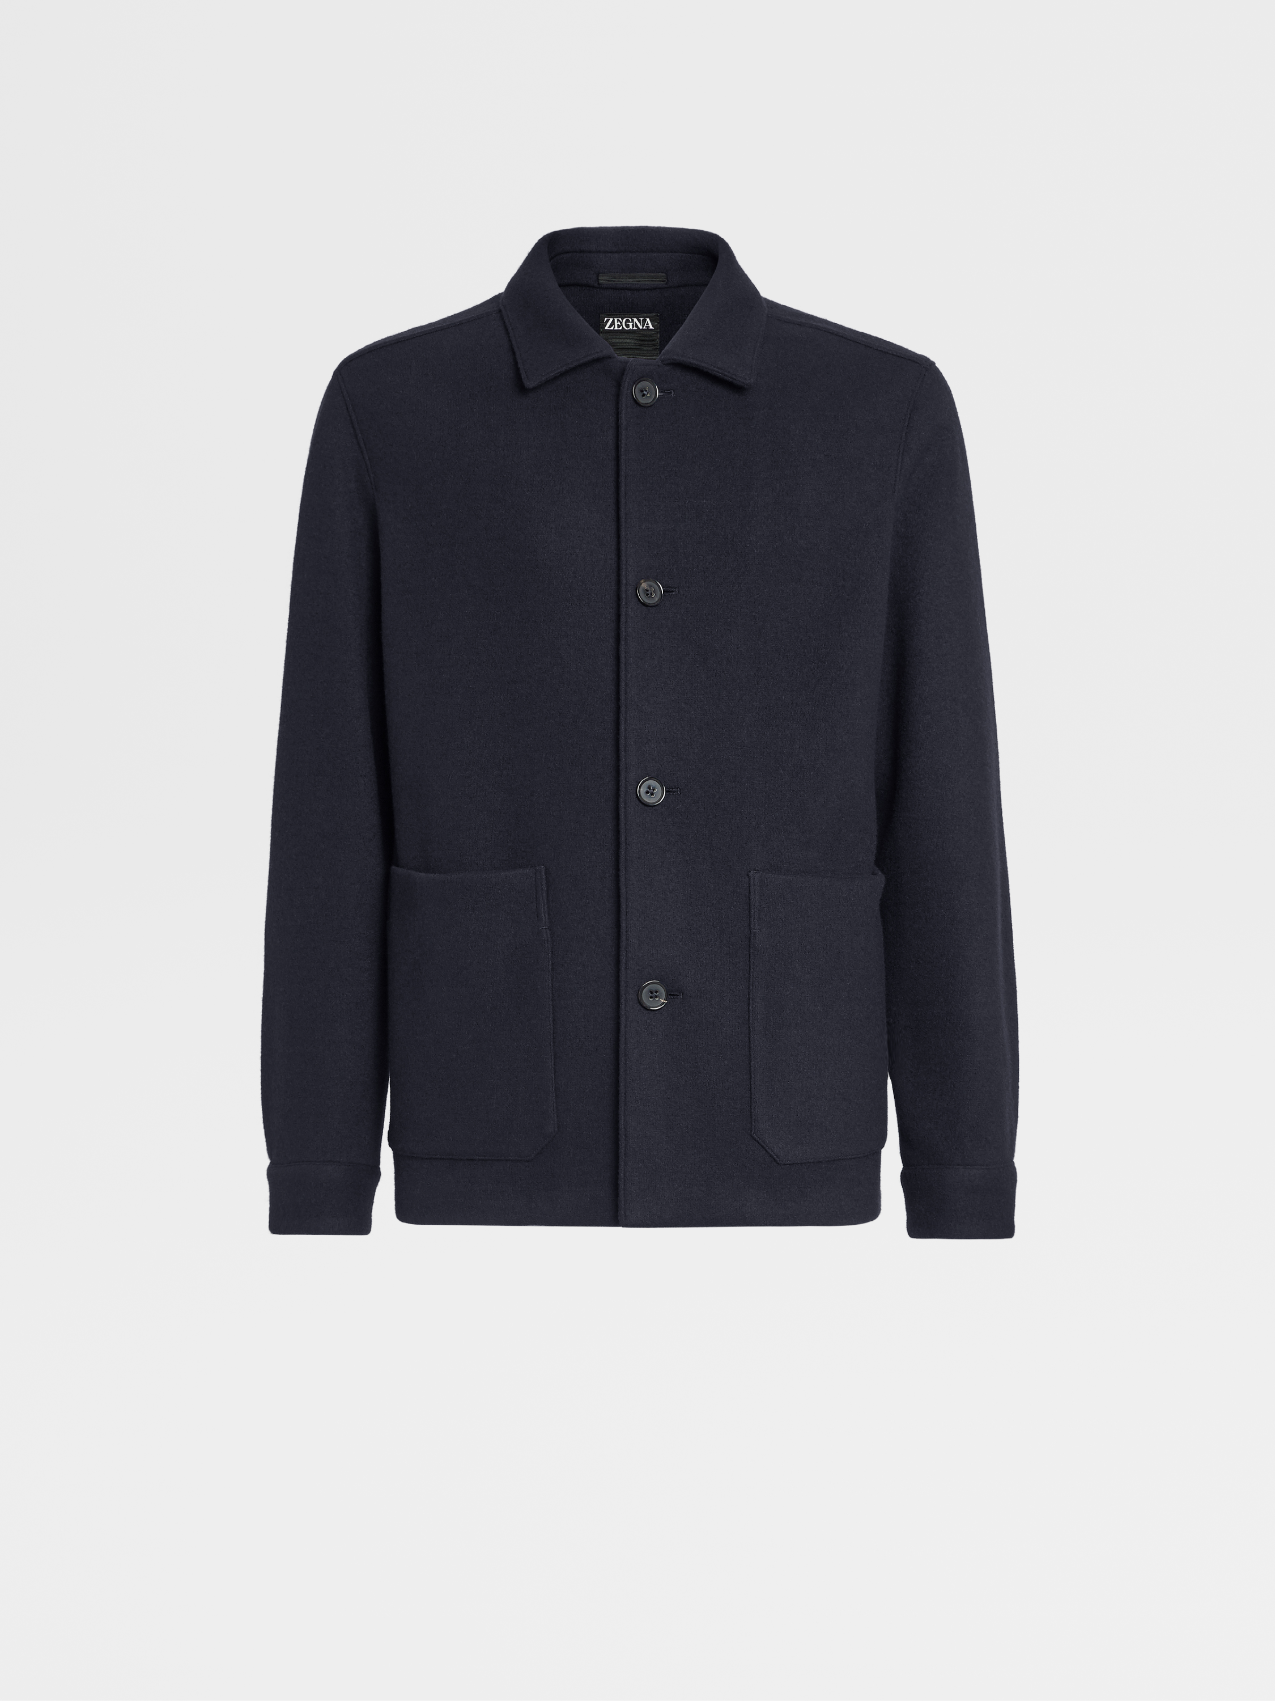 Wool and Cashmere Alpe Chore Jacket